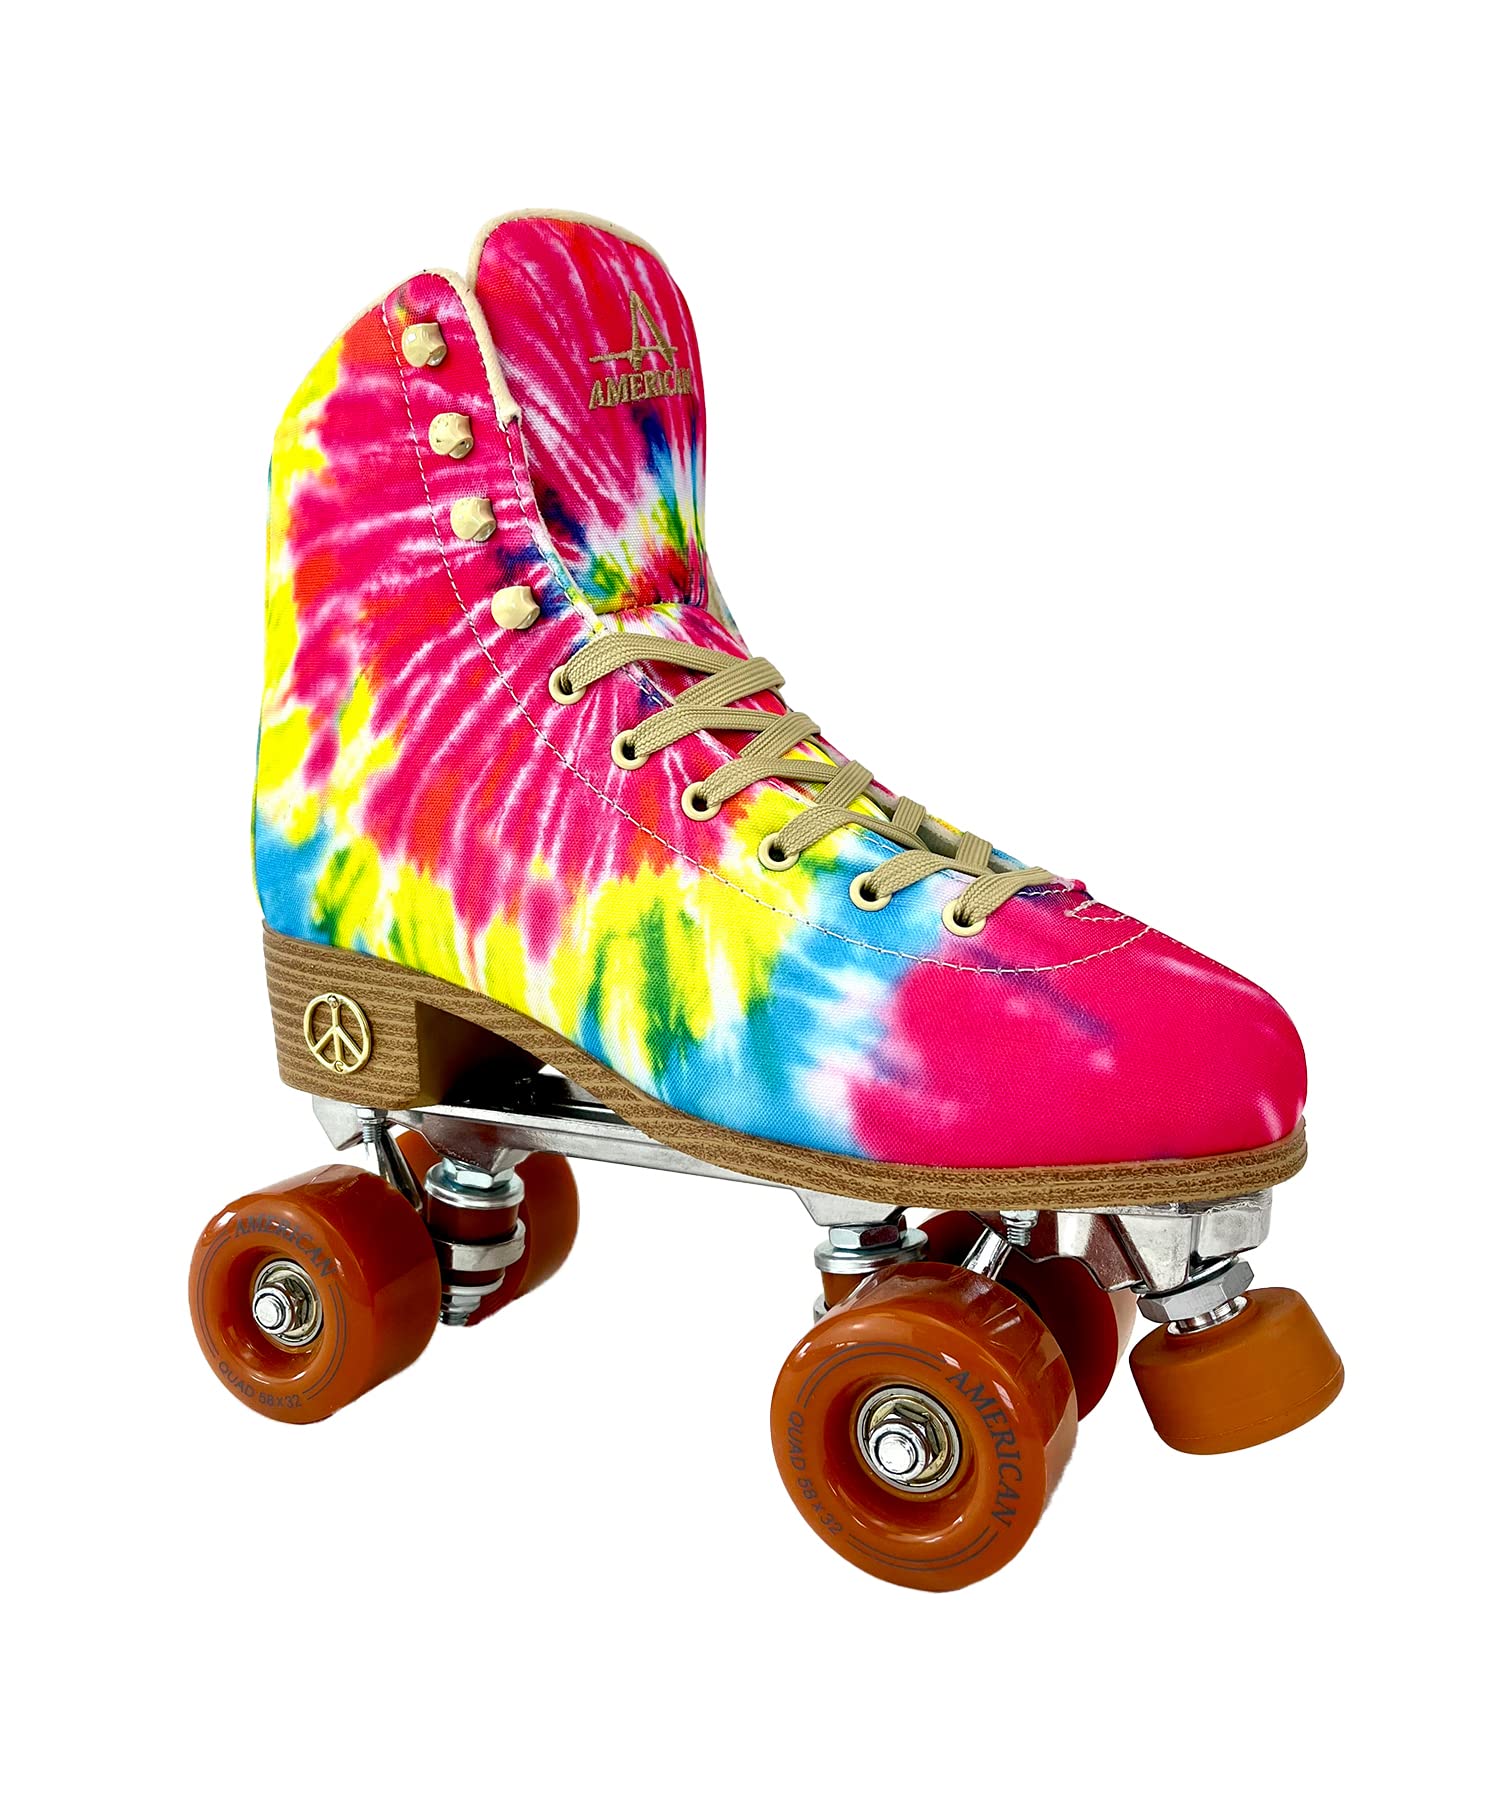 American Athletic Quad Roller Skates - All One